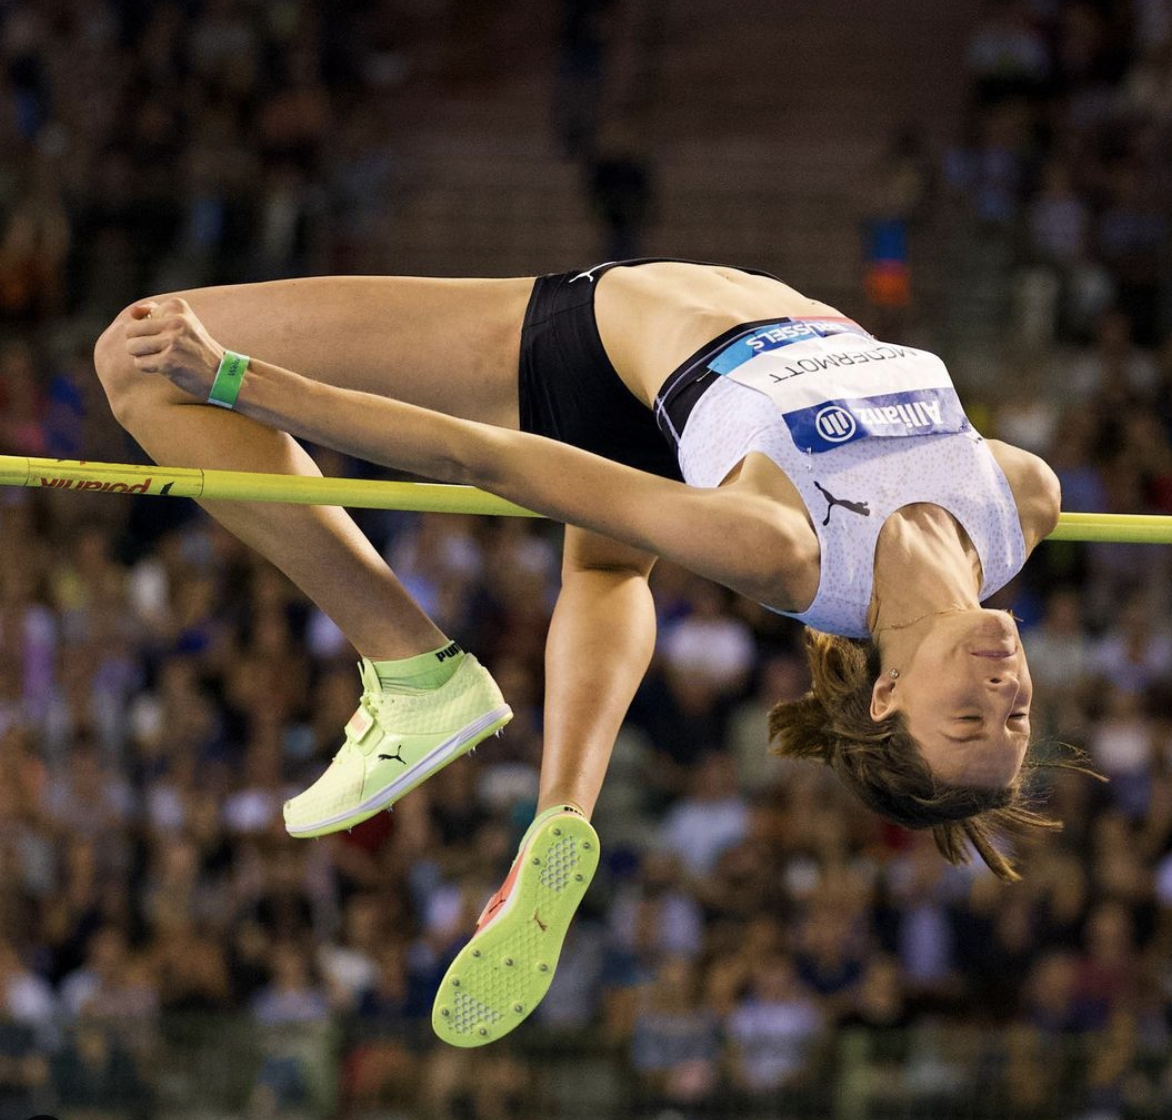 Nicola McDermott soaring in the Diamond League competition